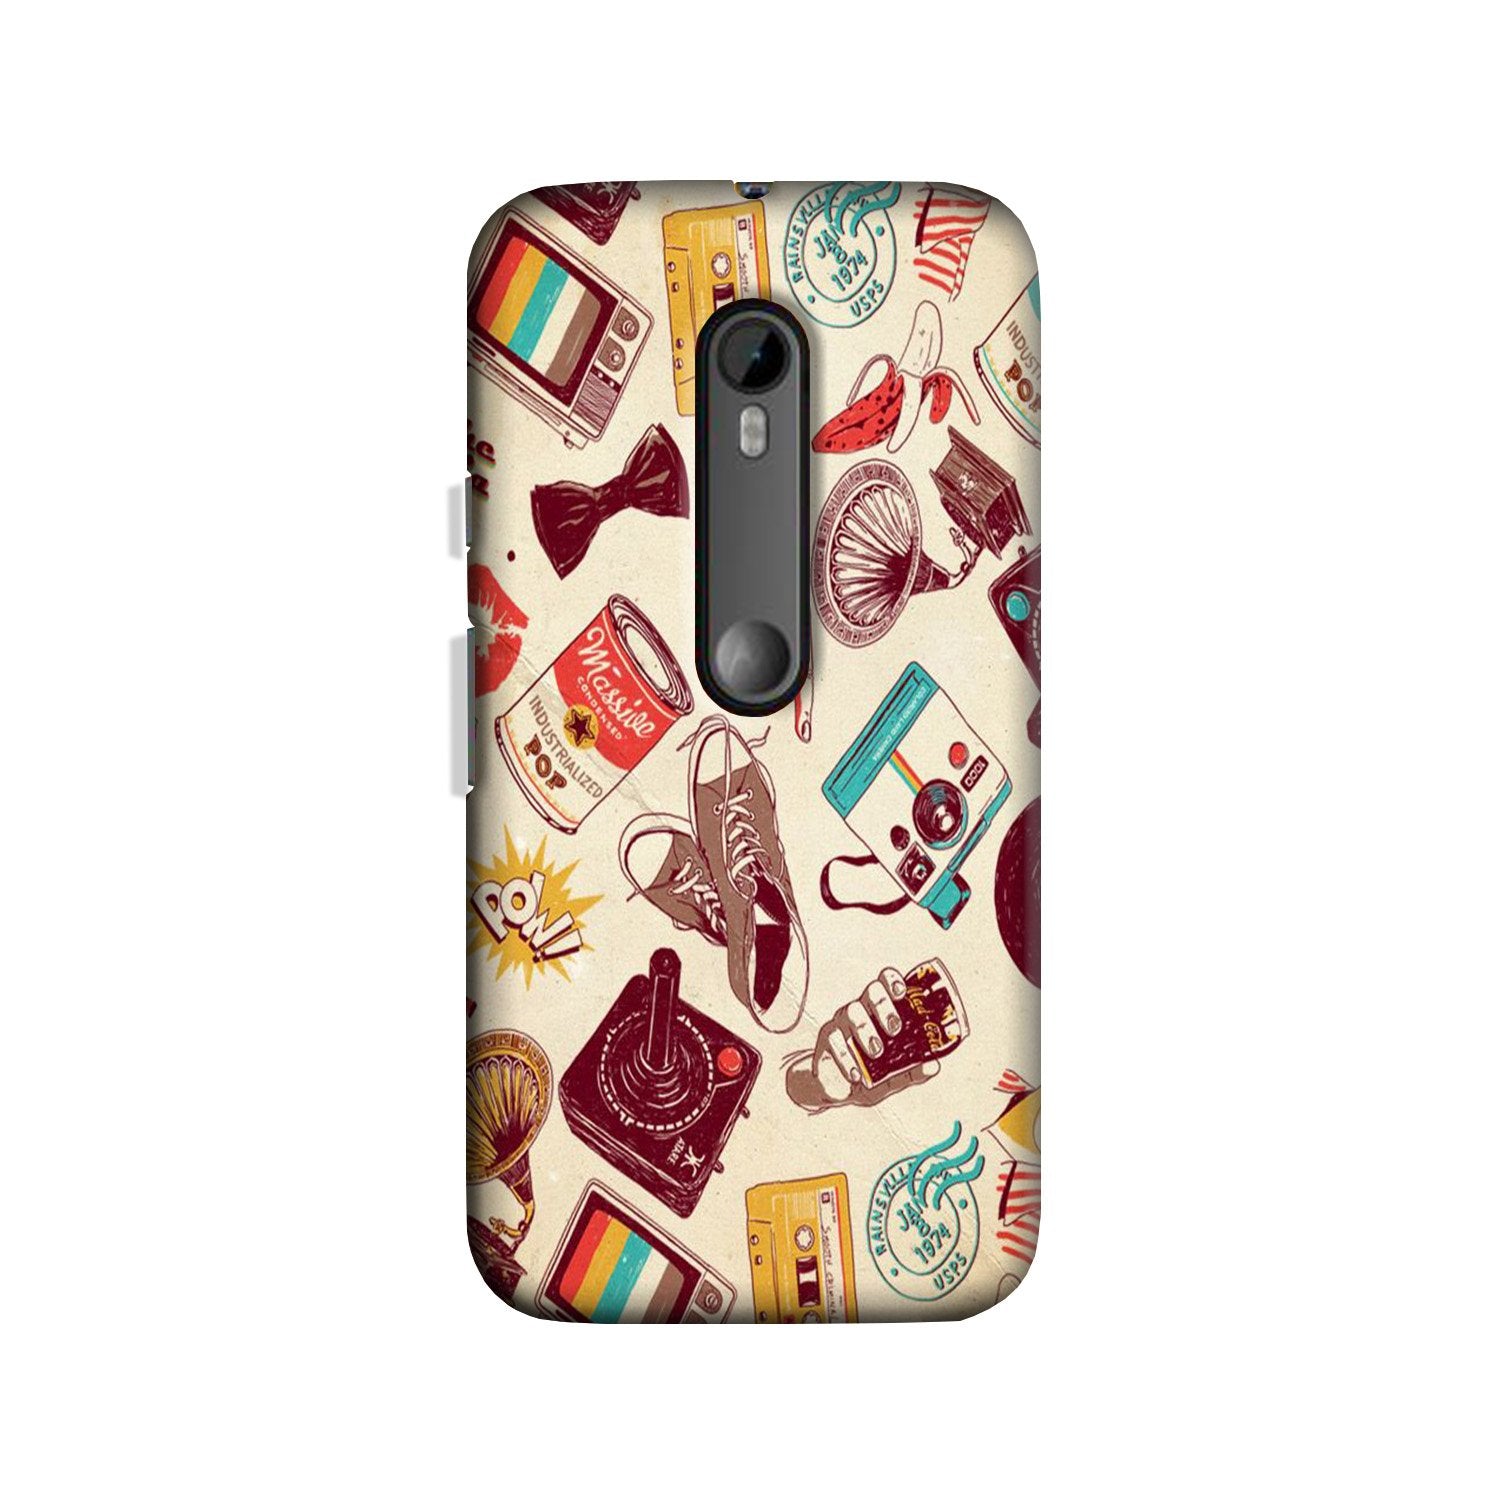 Vintage Case for Moto X Play